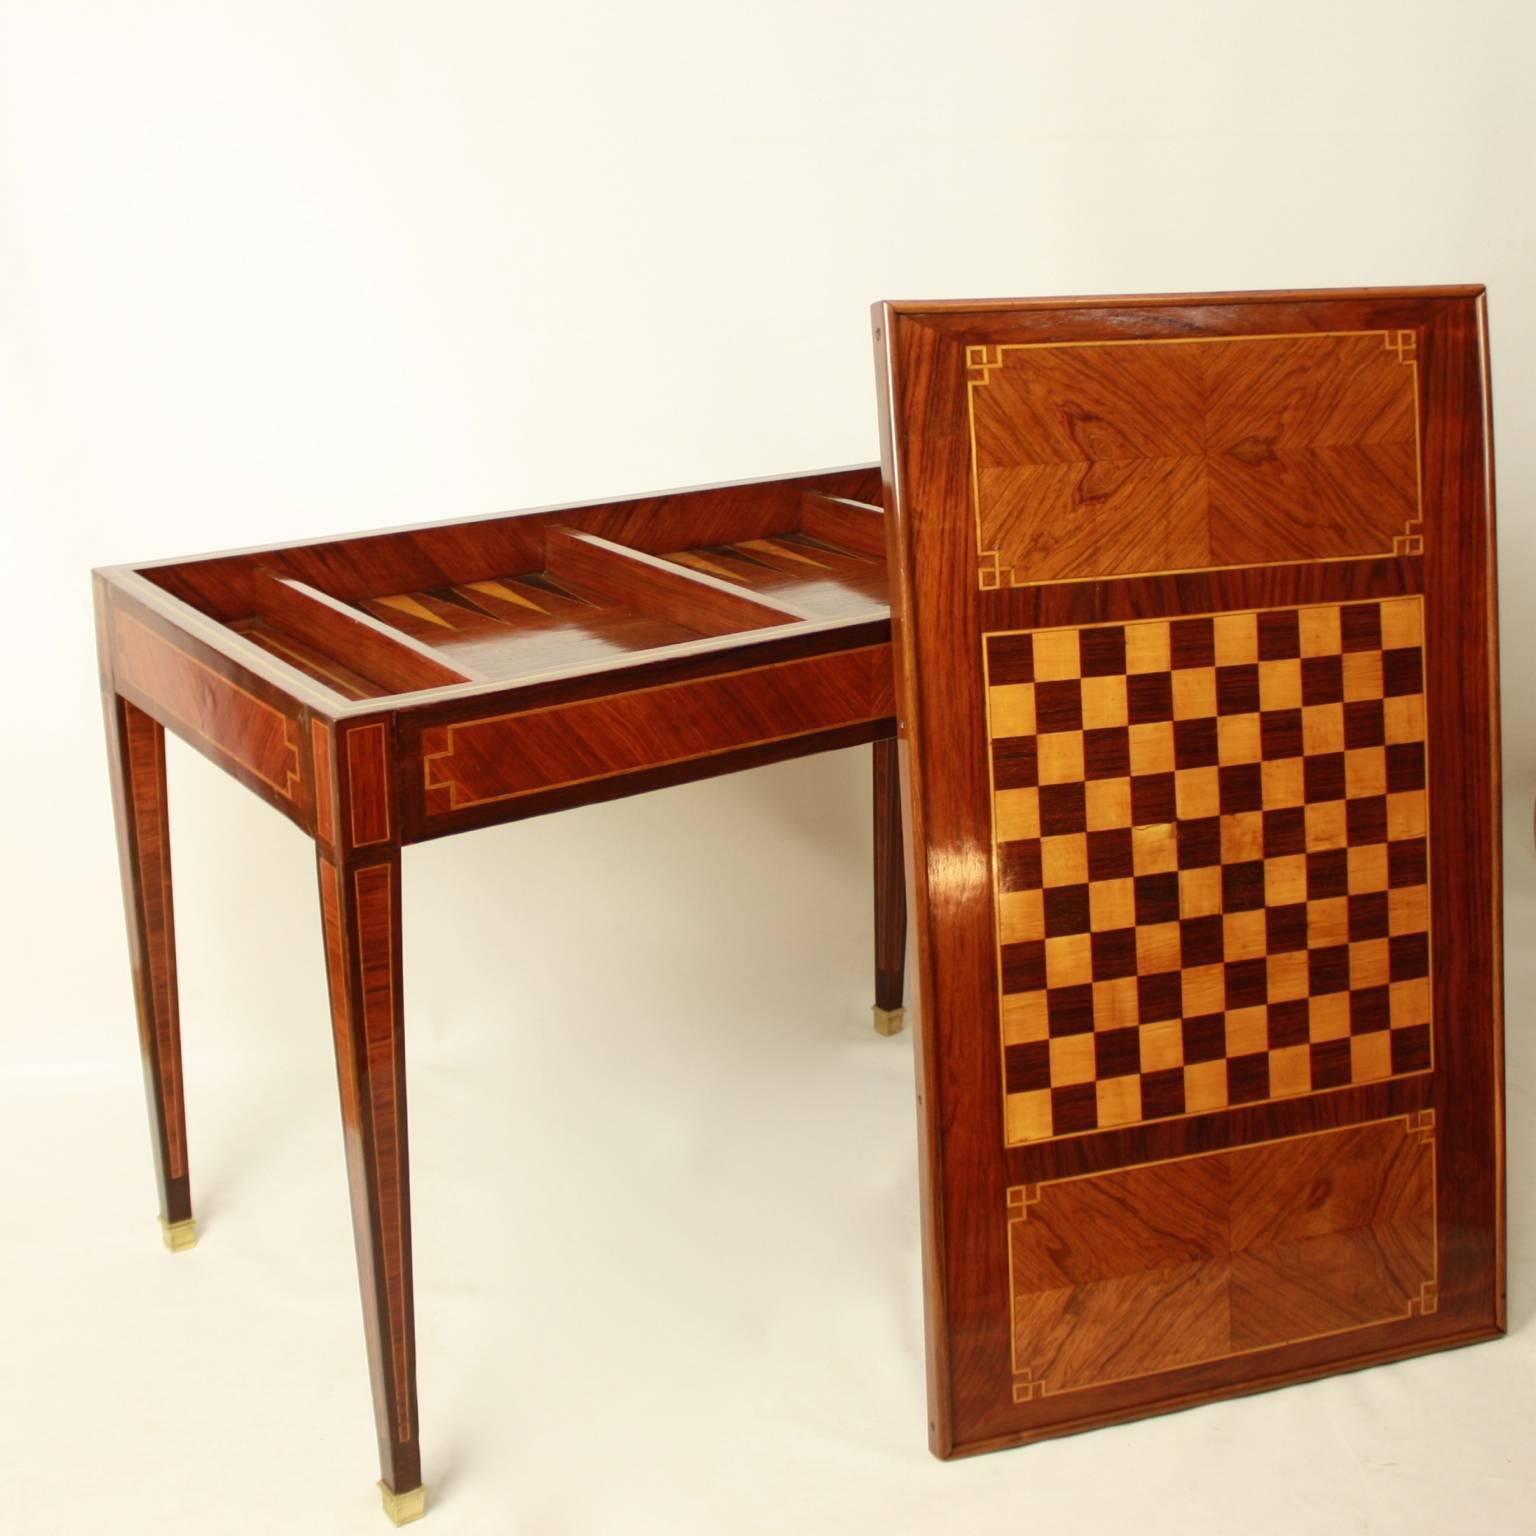 A 19th century tric trac game table, the rectangular top removable, inlaid on one side with a chess board, on the other with a simple banding around a vivid walnut veneer - ideal for a card game. Removing the top reveals a tric trac board, tric trac